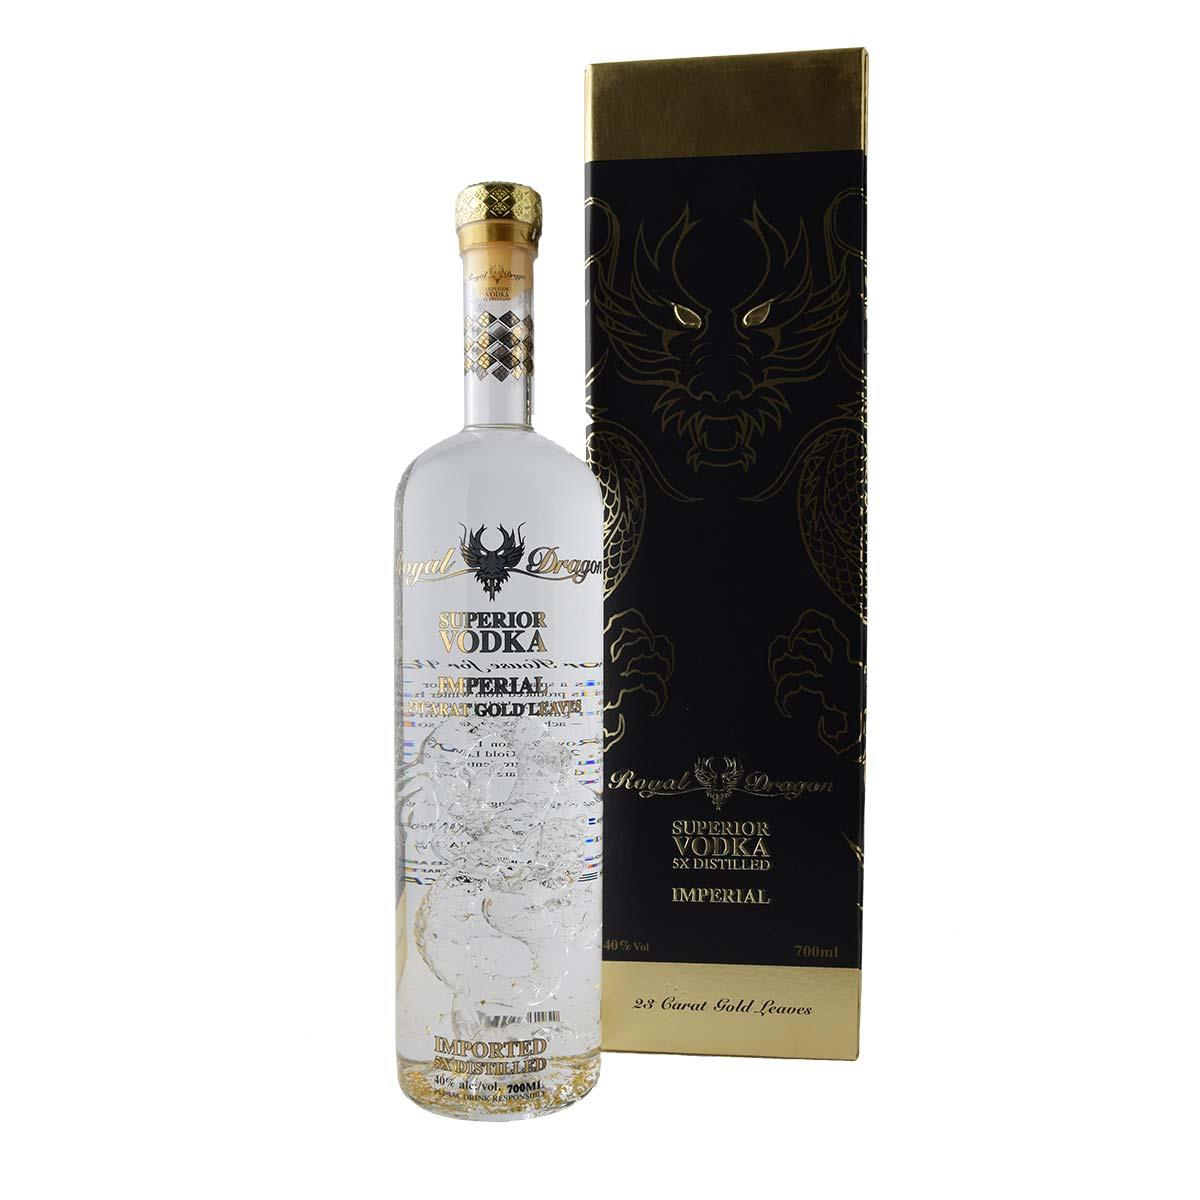 Royal Dragon Imperial 23 Carat Gold Leaves Βότκα 700ml